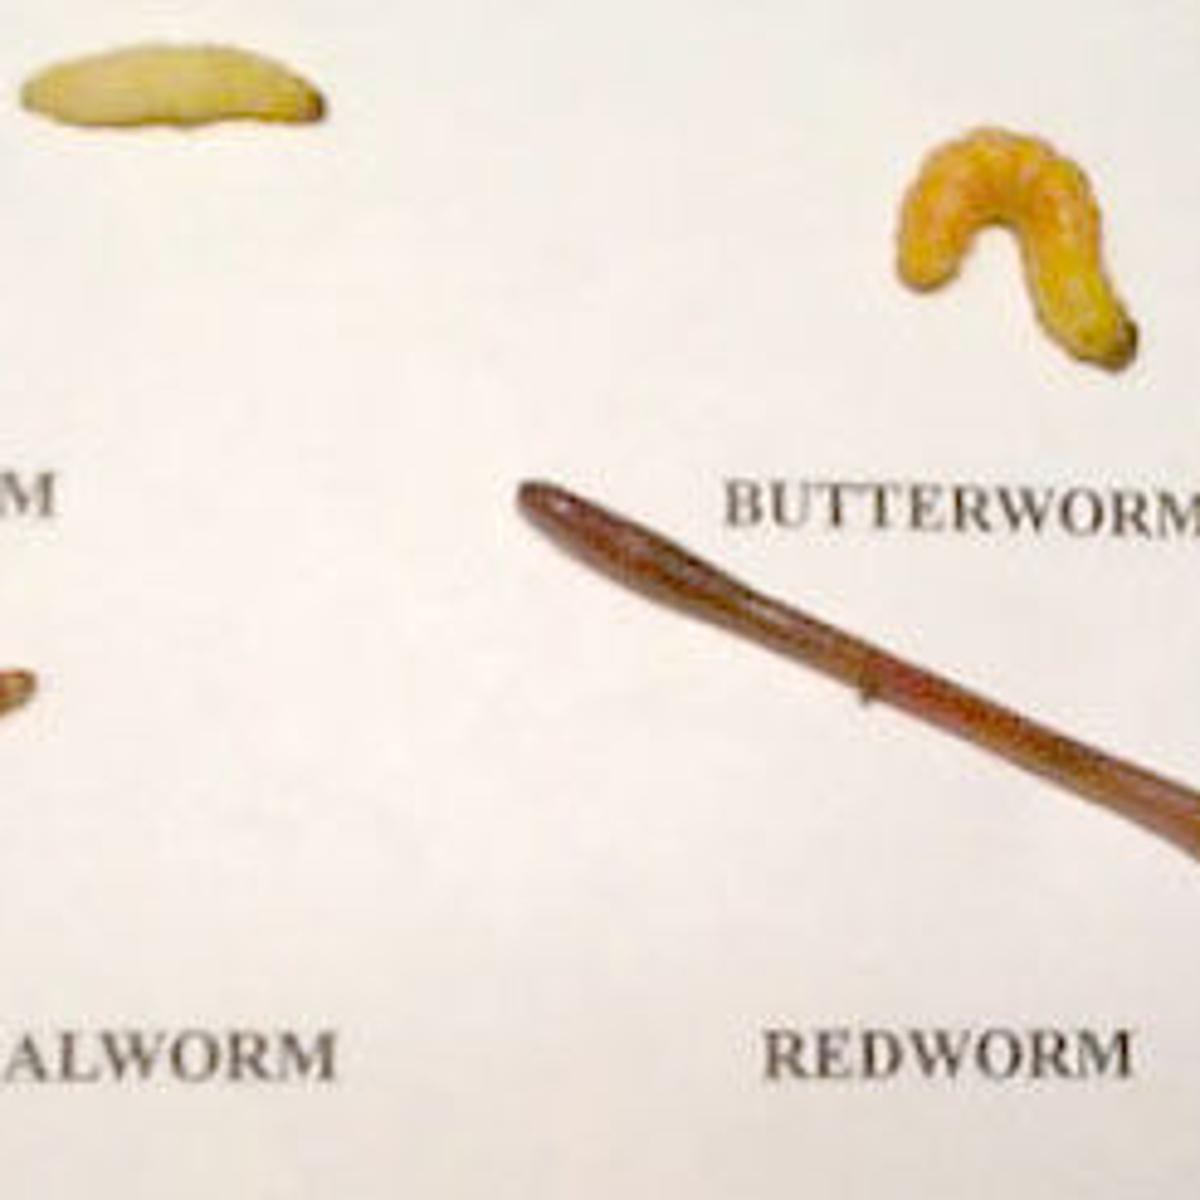 How well do you know your worms?